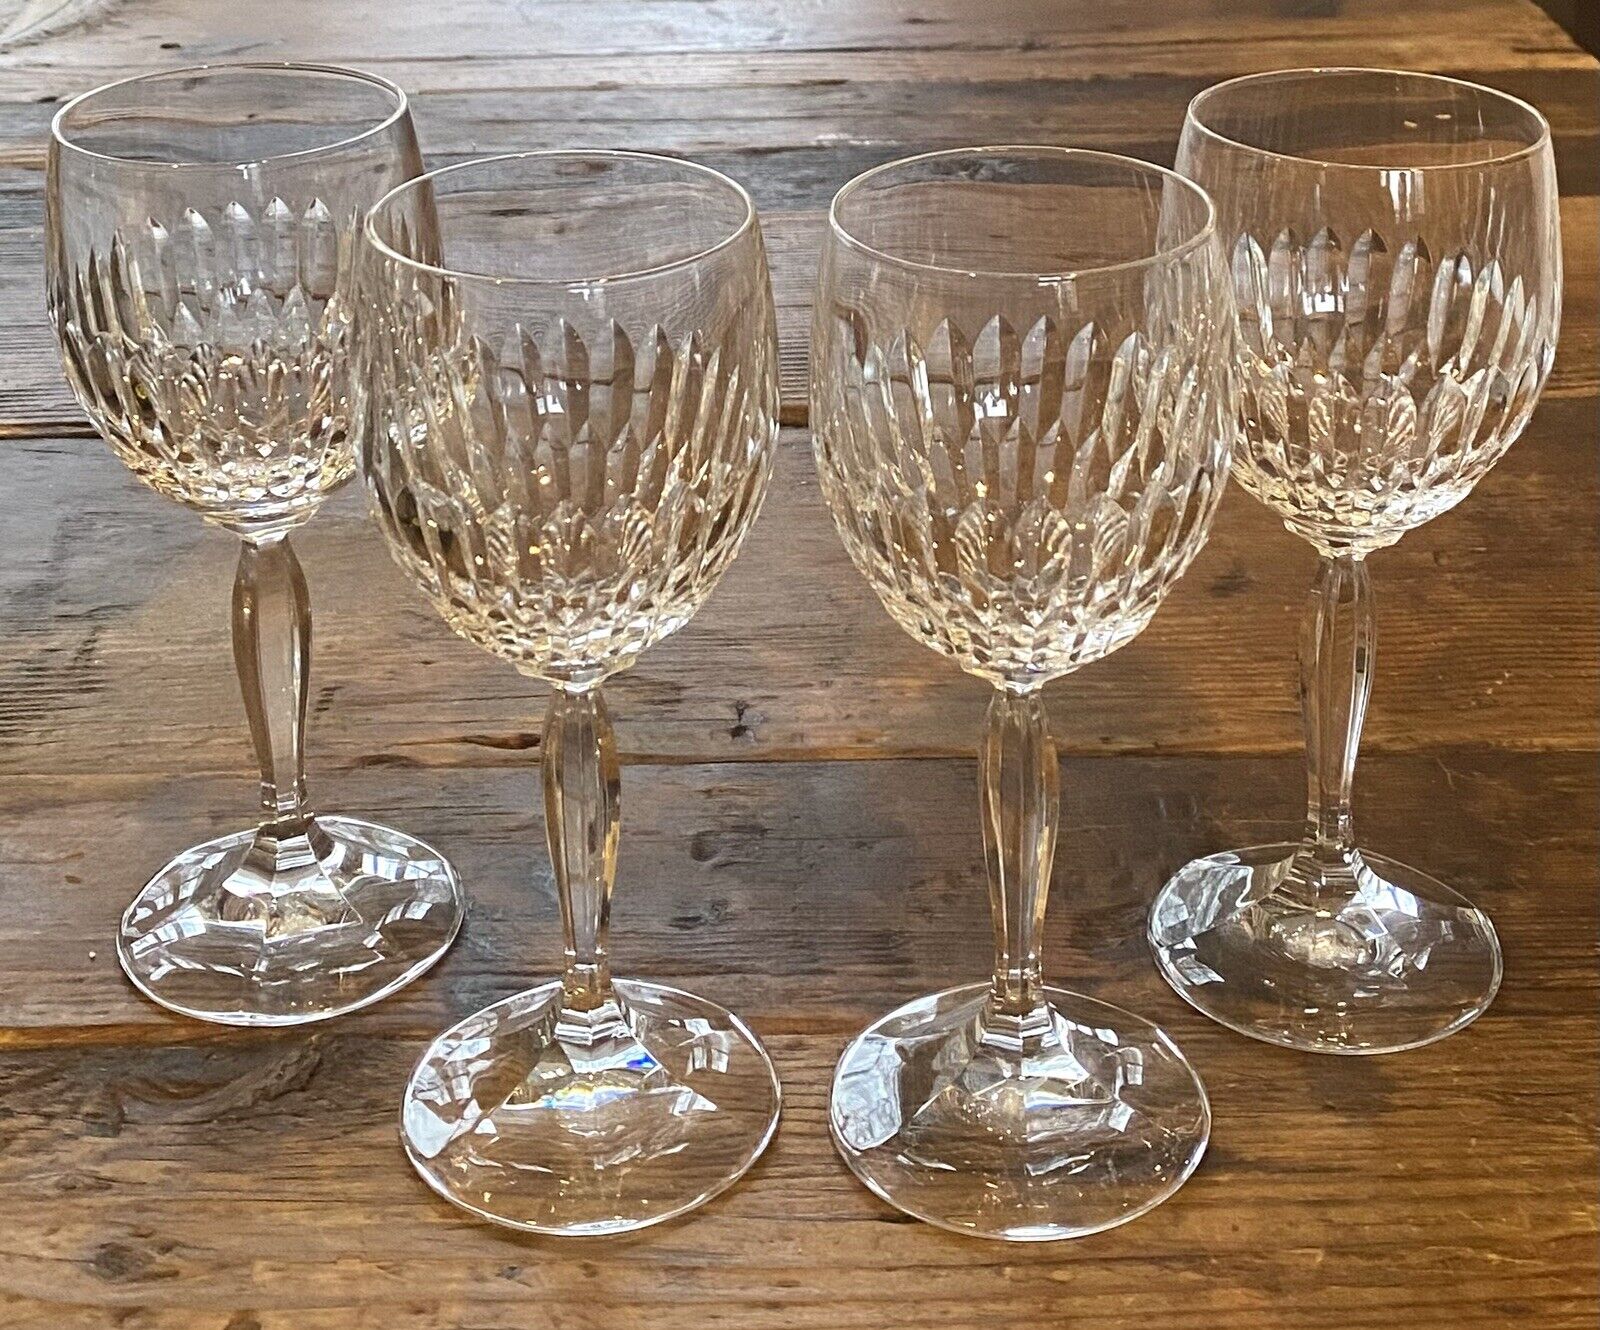 (4) \'Celebration\' by Schott Zweisel Wine Glasses. Germany. Excellent Condition